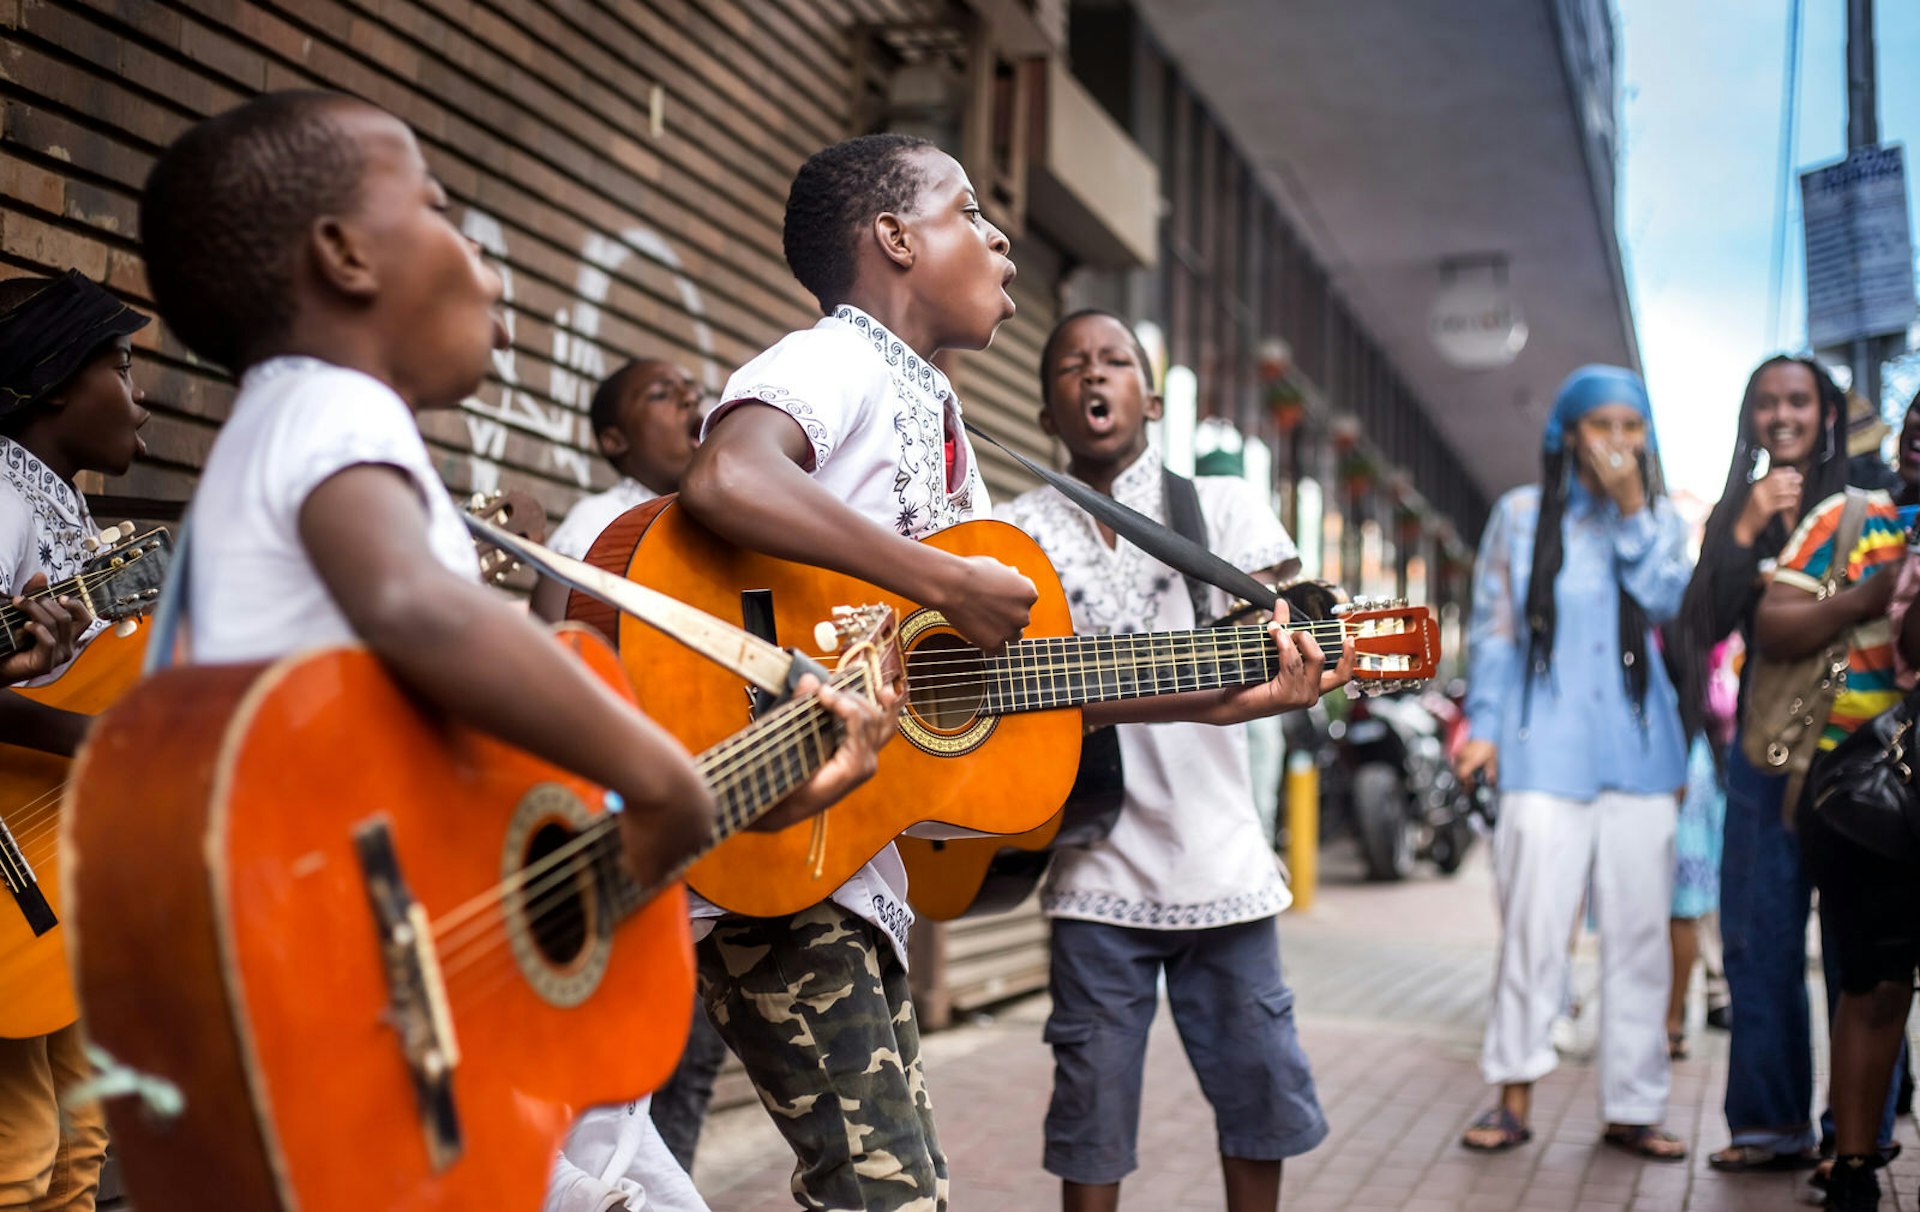 Children with guitars busk on the streets of Johannesburg.